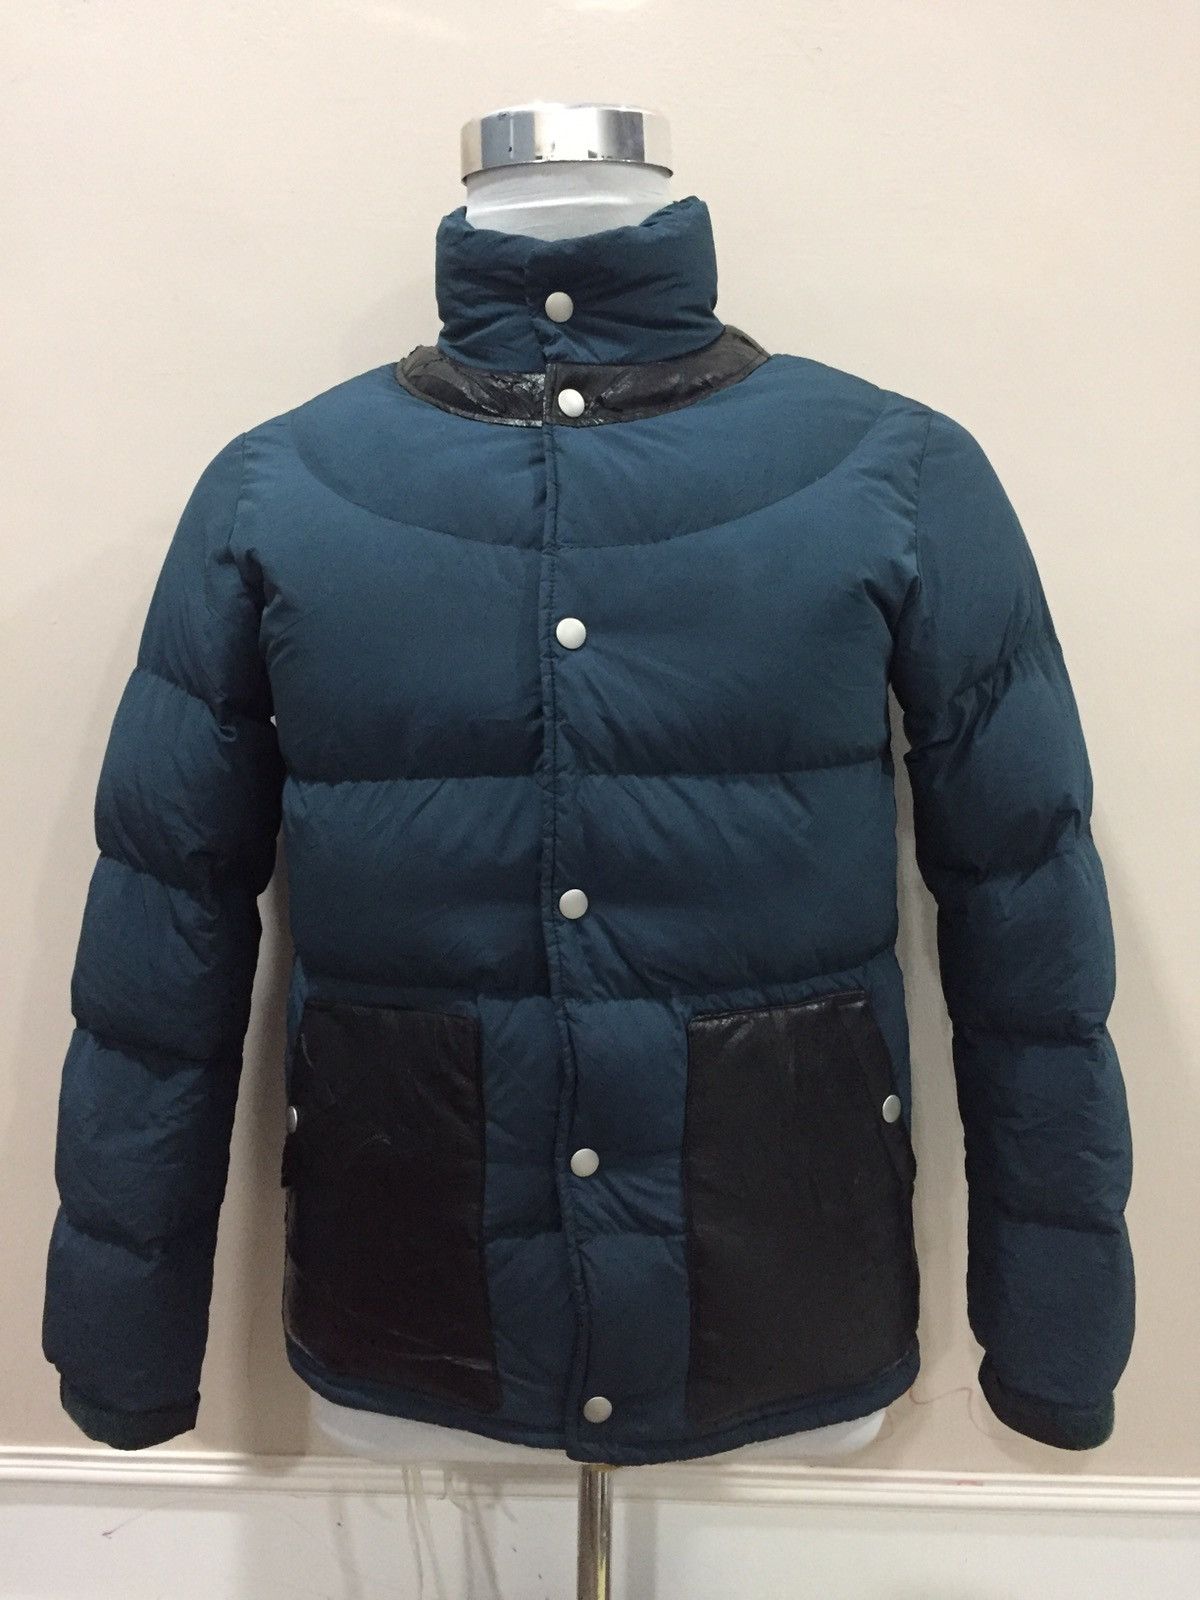 Undercover Uniqlo undercover by jun takahashi down puffer jacket | Grailed